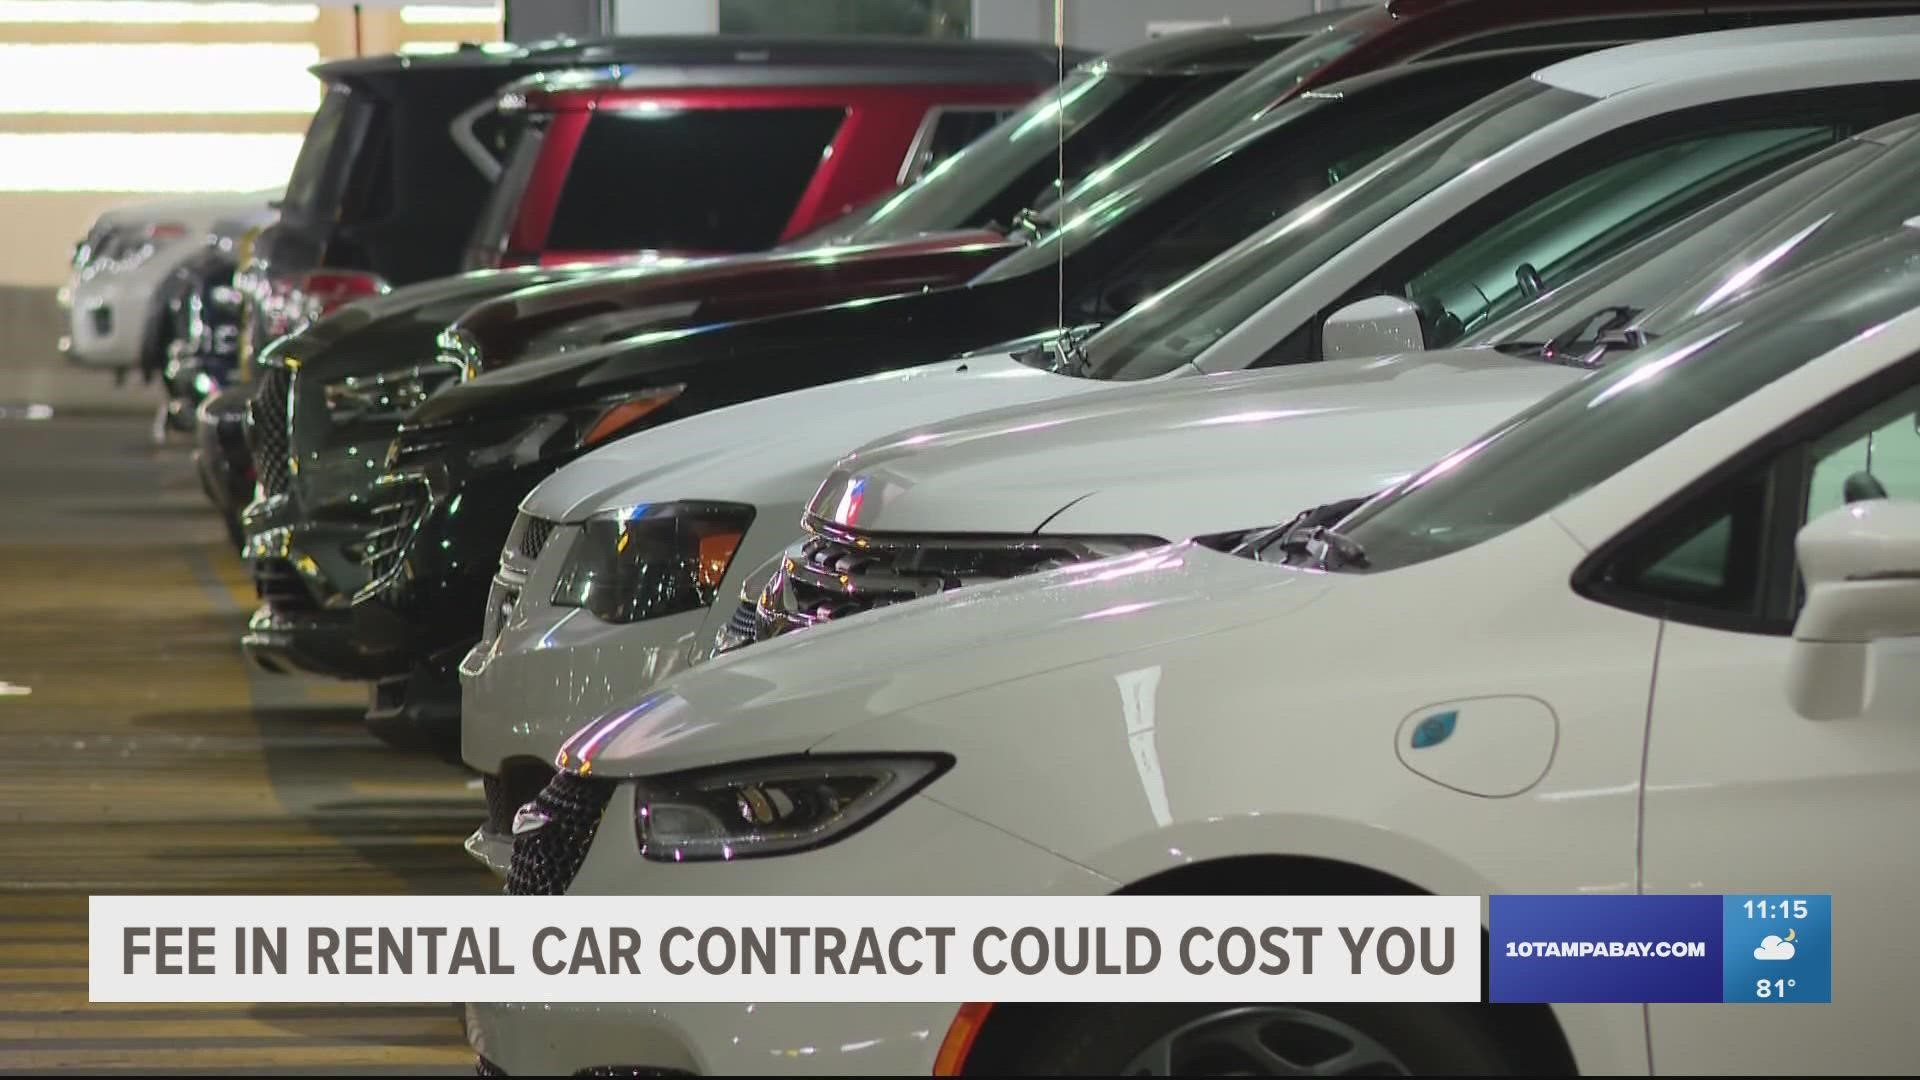 Due to the pandemic and car shortages, "loss of use" in the car rental contract has become more of an issue for renters who experience an accident.